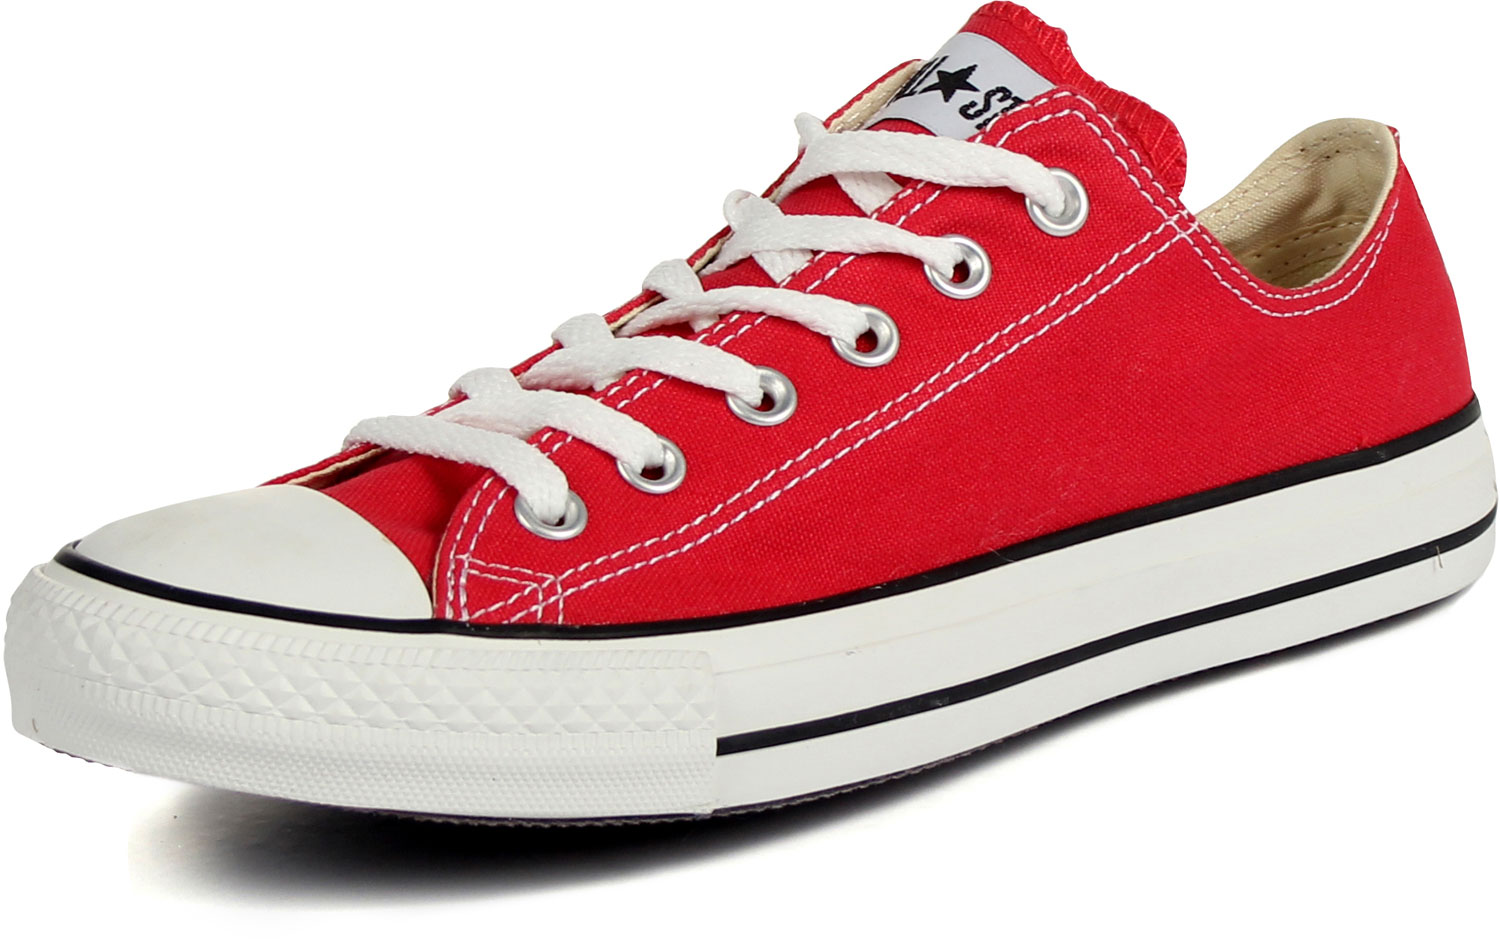 Robusto estimular intervalo Converse Chuck Taylor All Star Shoes (M9696) Low Top in Red